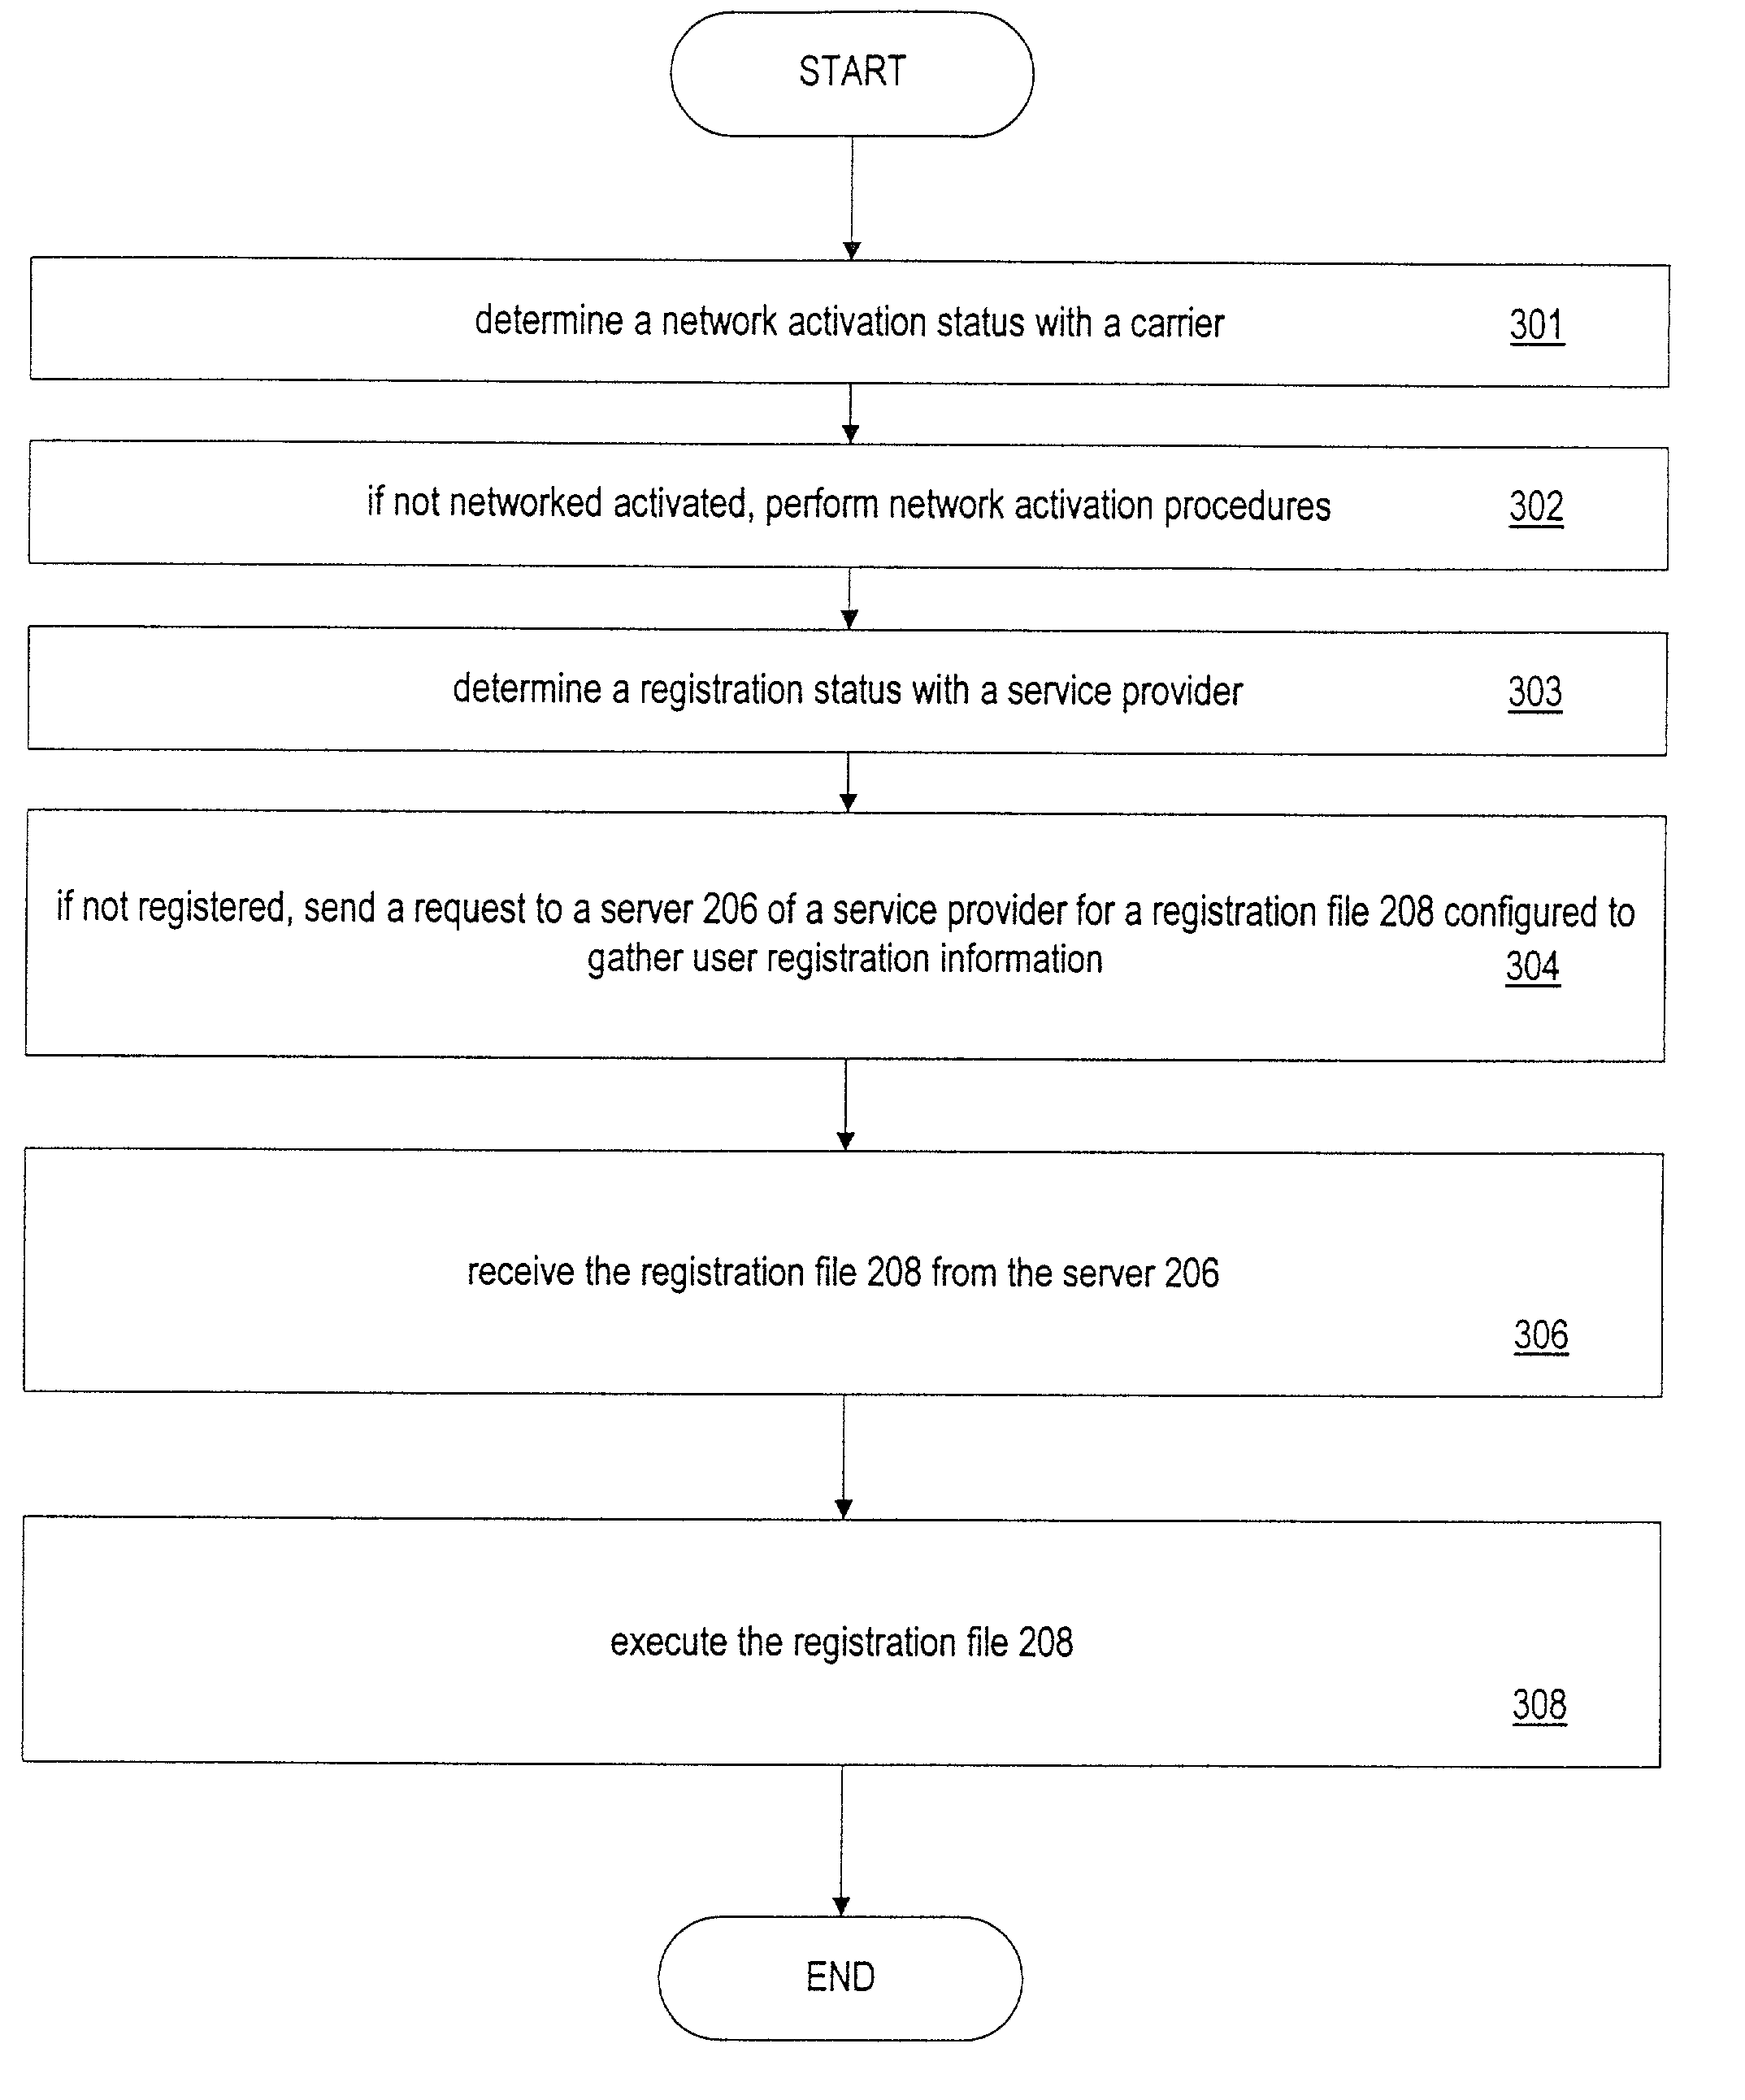 Generic activation and registration framework for wireless devices